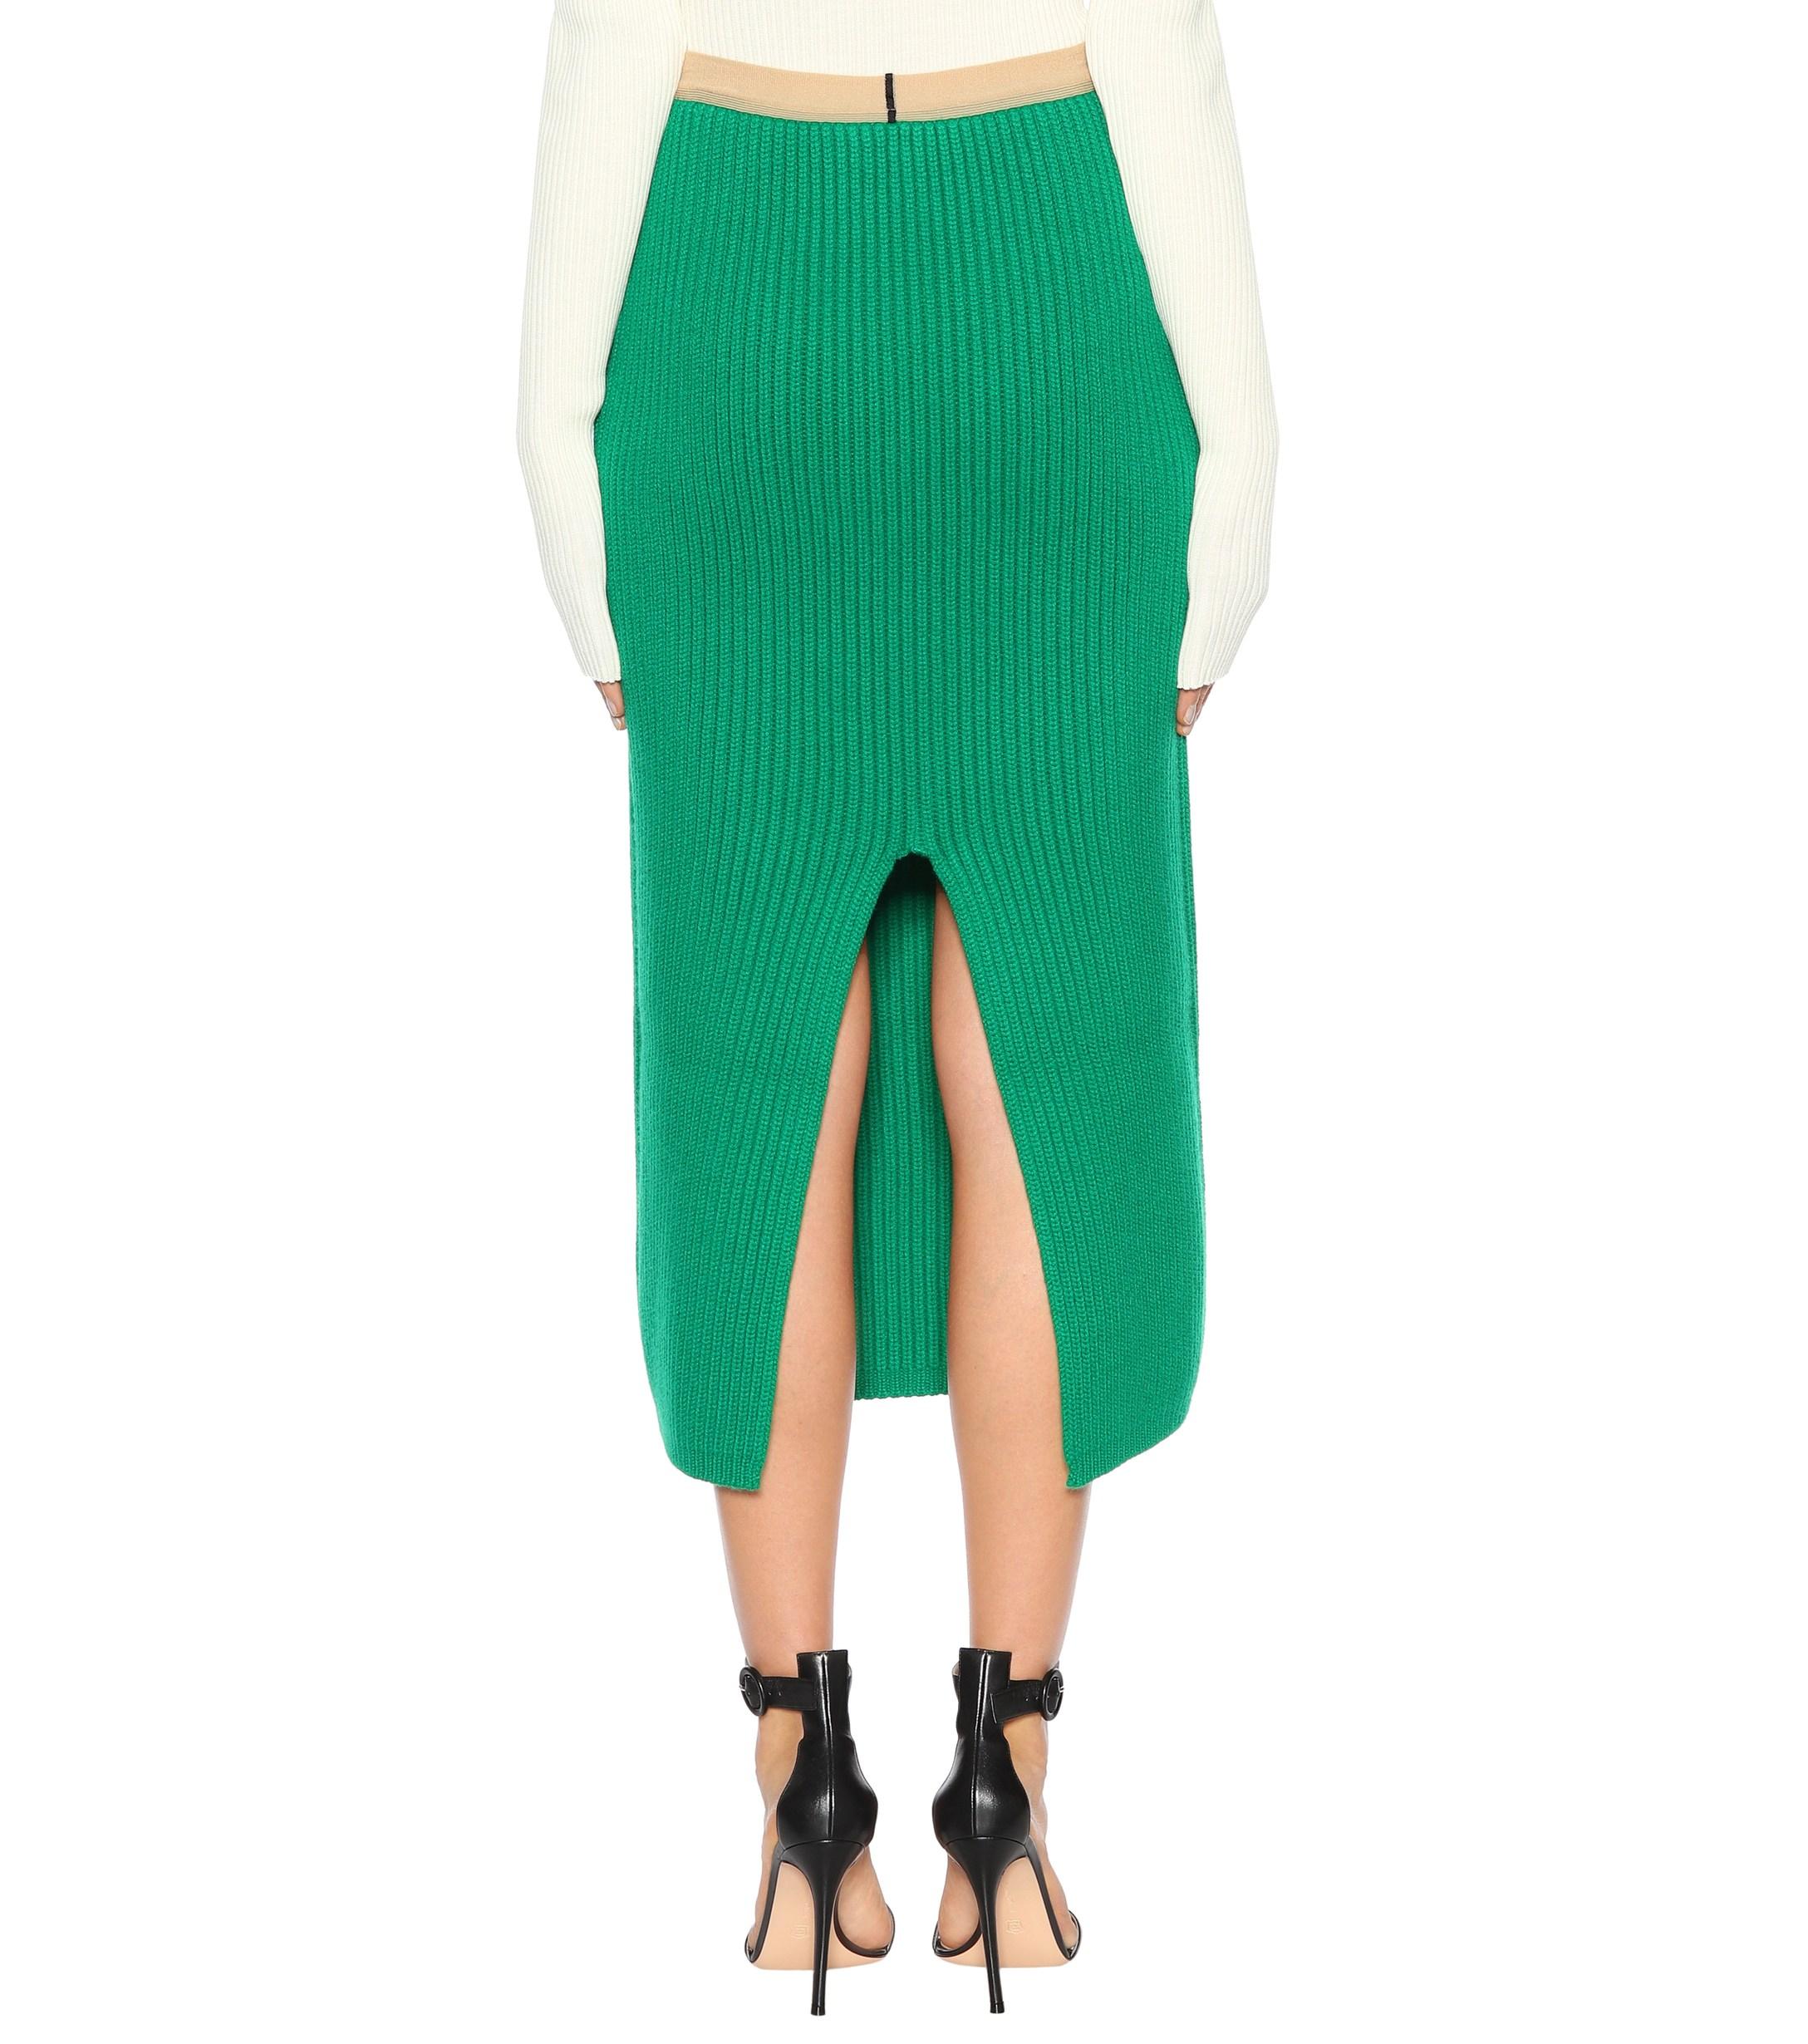 CALVIN KLEIN 205W39NYC Wool And Cashmere Skirt in Green - Lyst